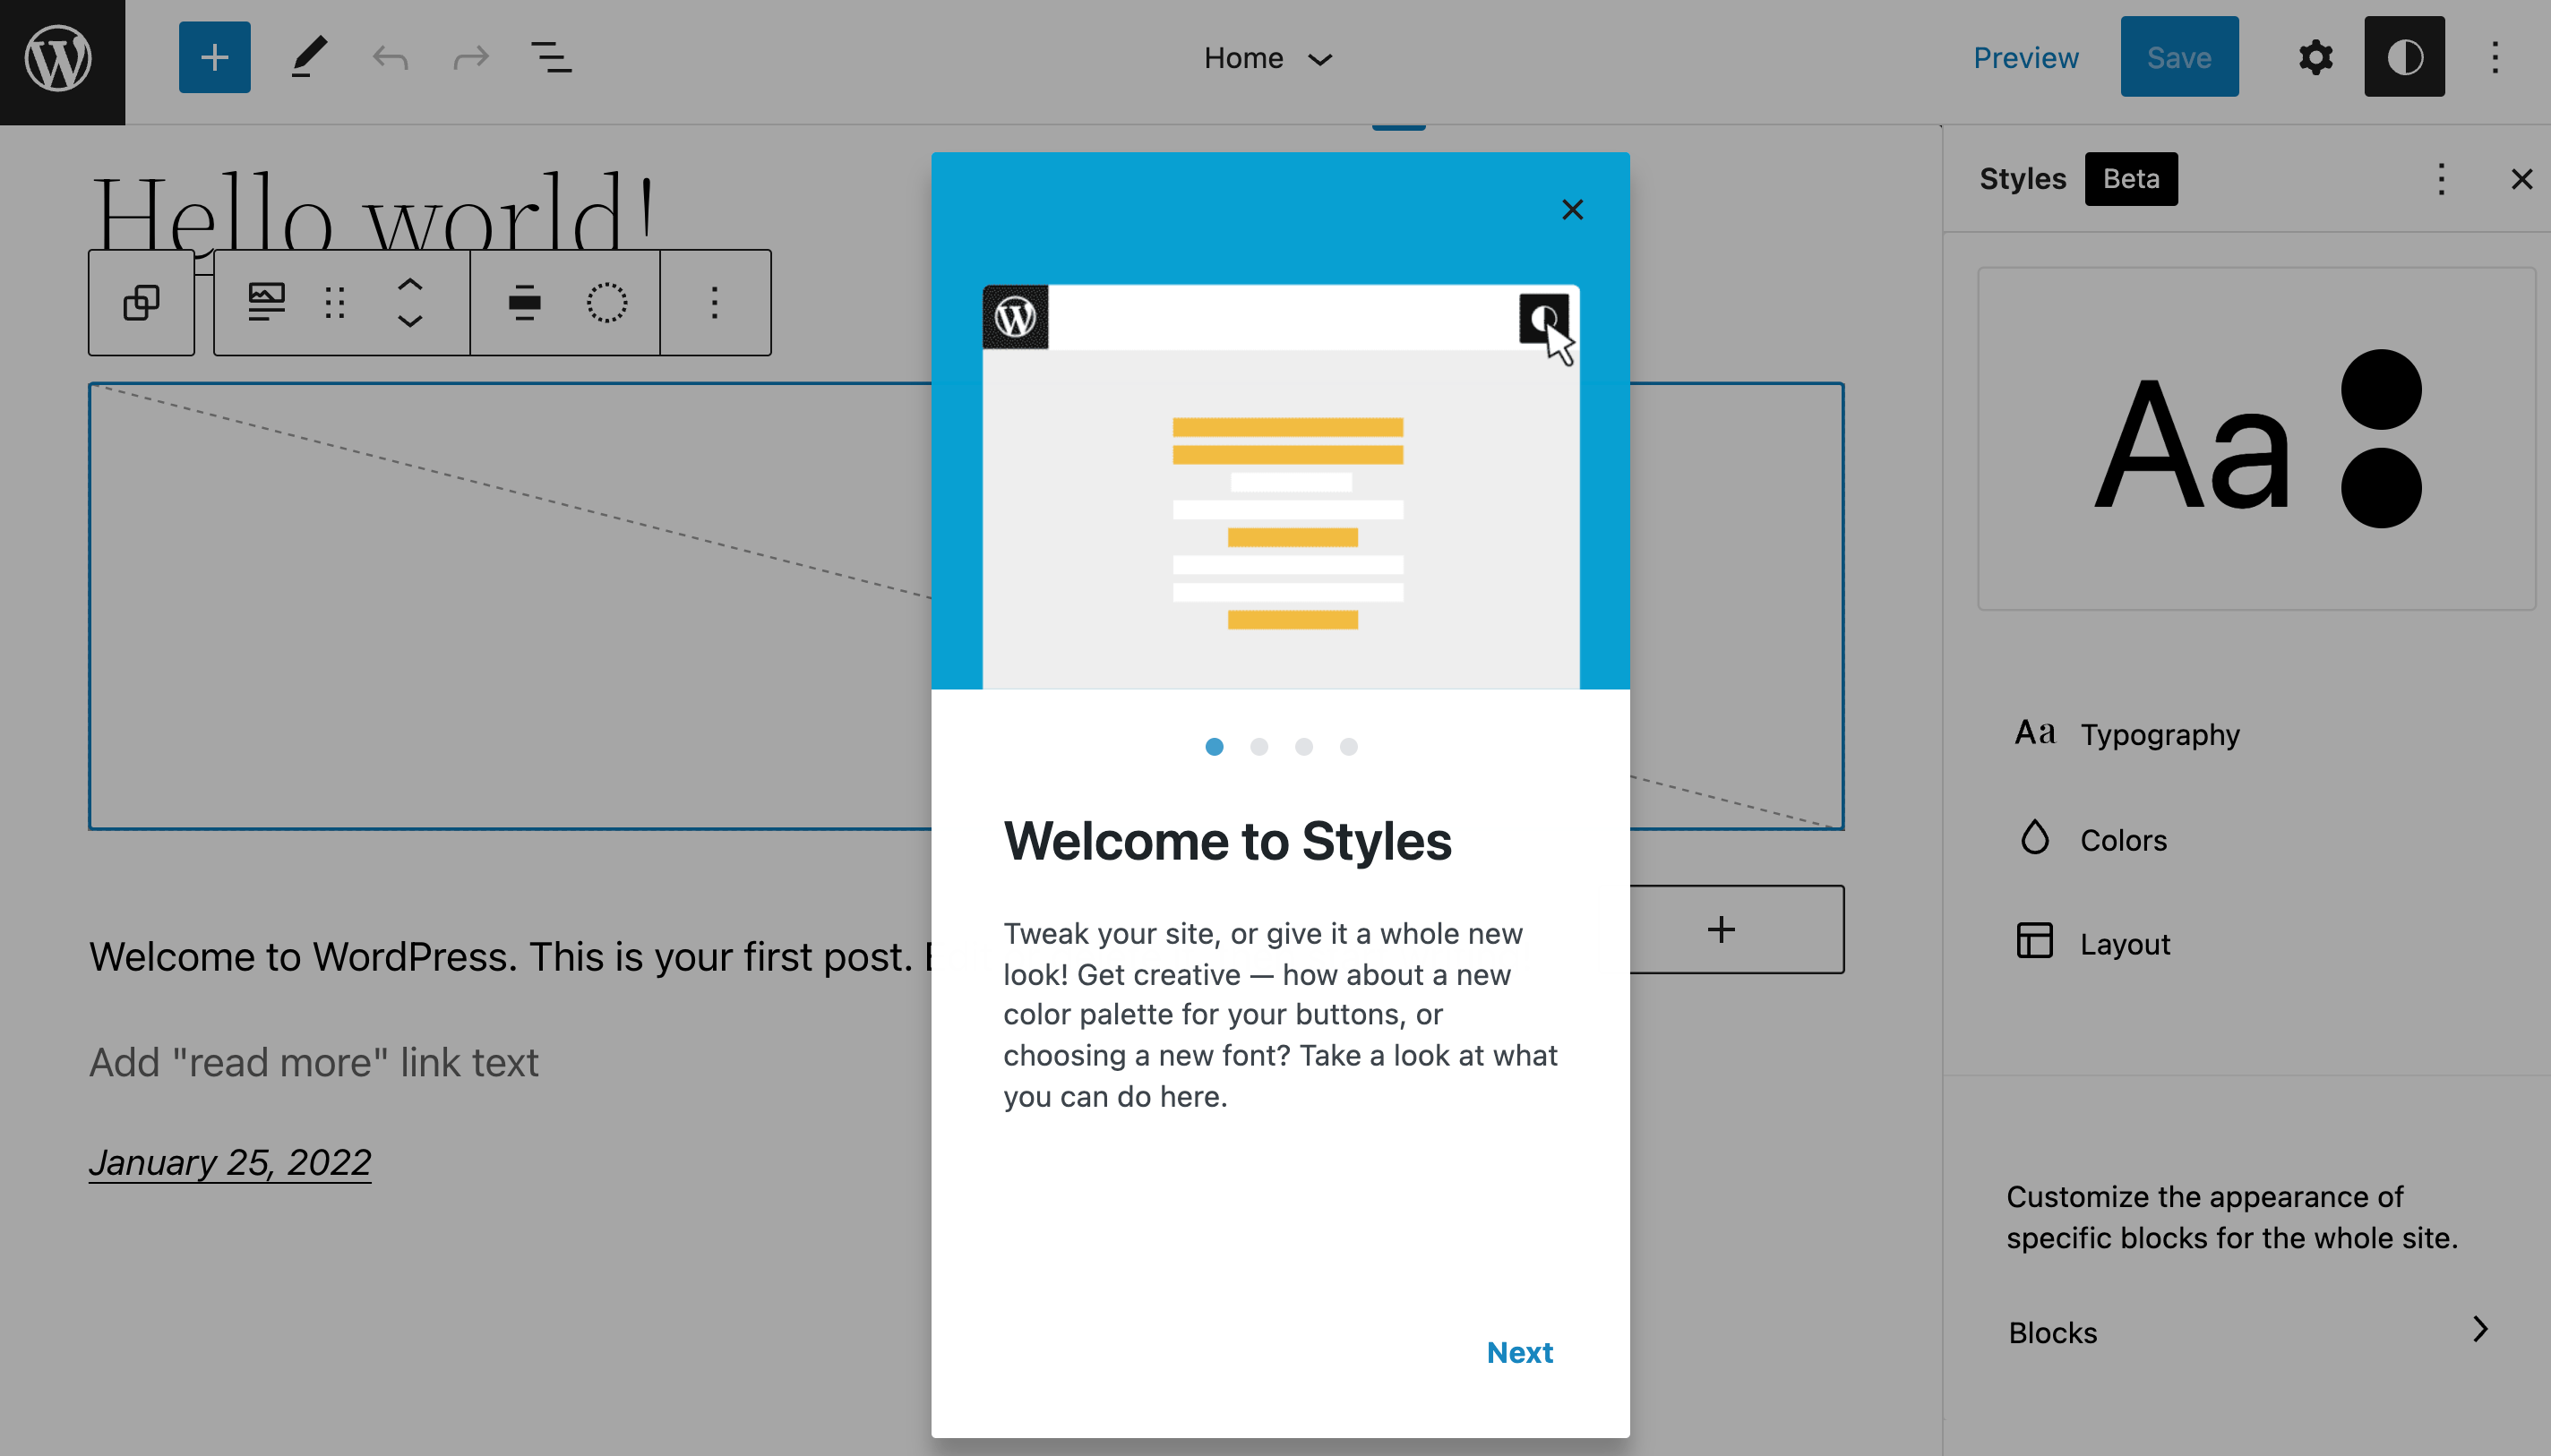 Welcome to WordPress' new Global Styles feature.